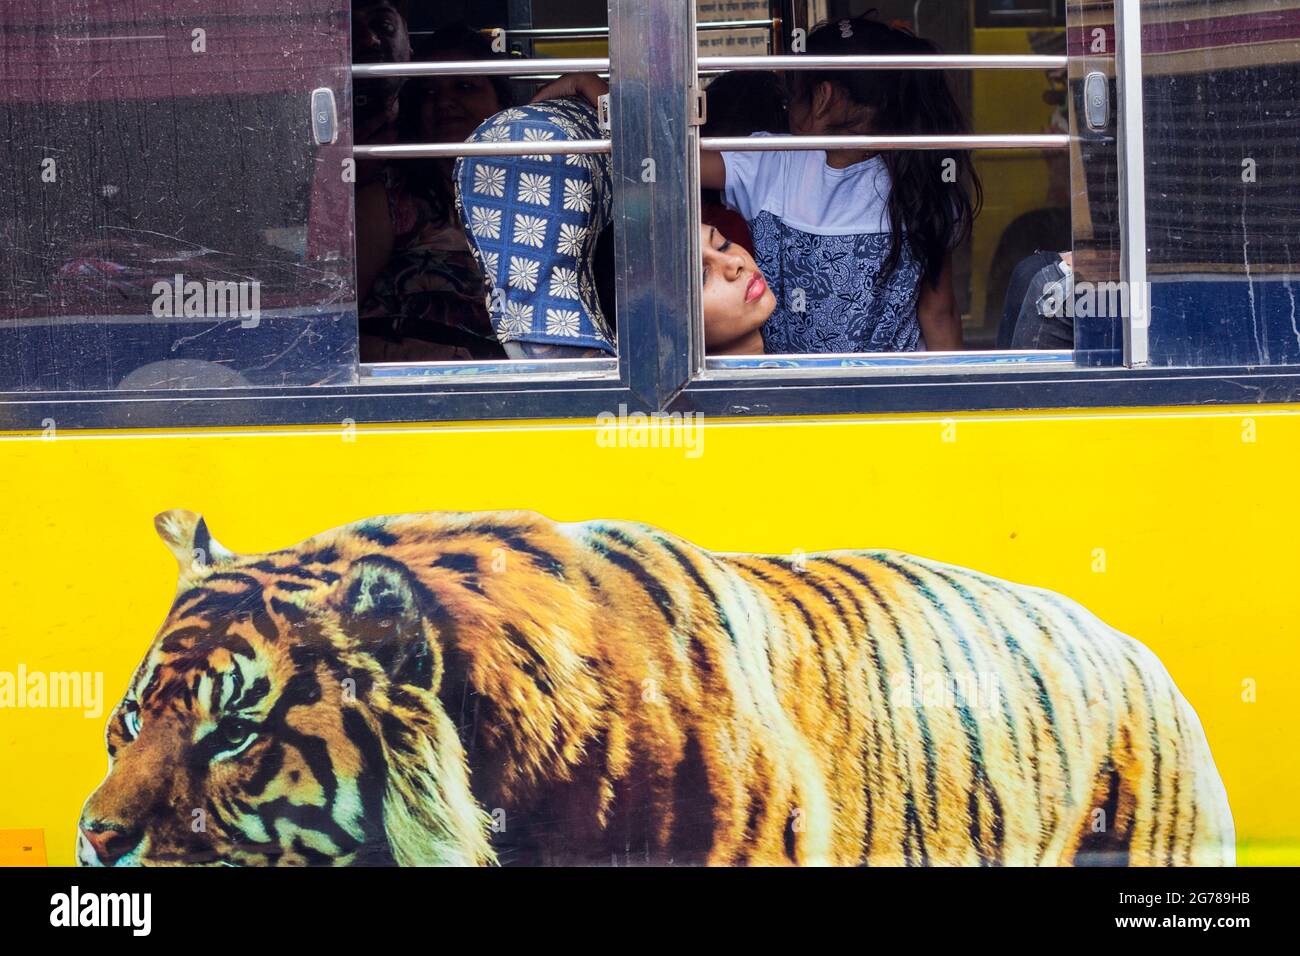 Attractive young Indian female asleep on bus beside above open window with image of prowling tiger painted on side of bus, Tamil Nadu, India Stock Photo